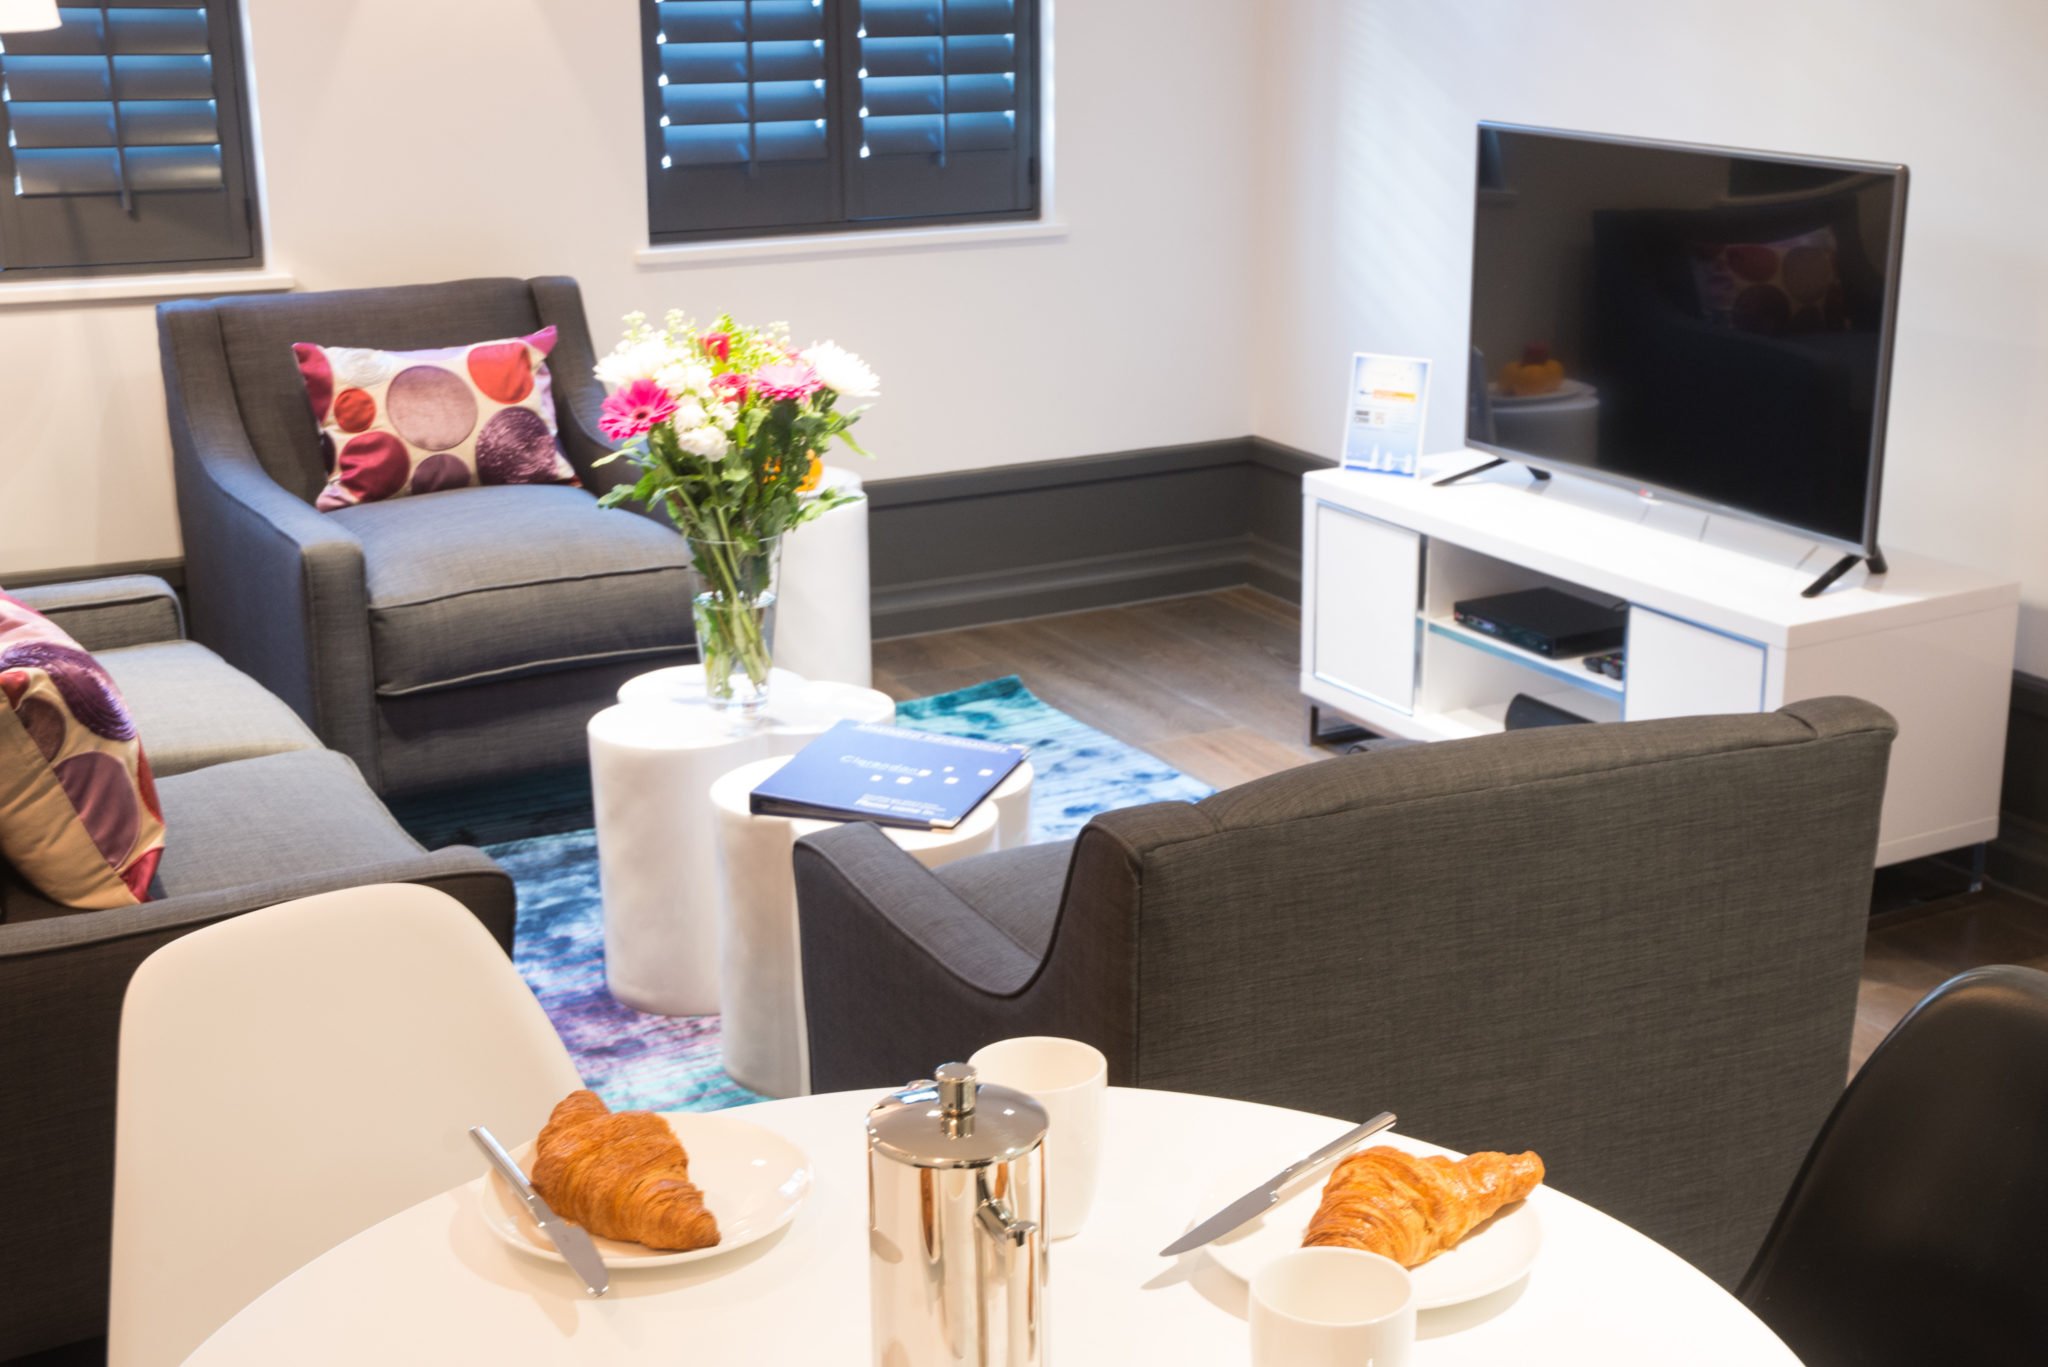 Covent-Garden-Accommodation-London-| Serviced-Apartments-Soho,-West-End,-Somerset-House,-Oxford-Street-|Cheap-&-Luxury-Short-Lets-London-|-BOOK-NOW---Urban-Stay